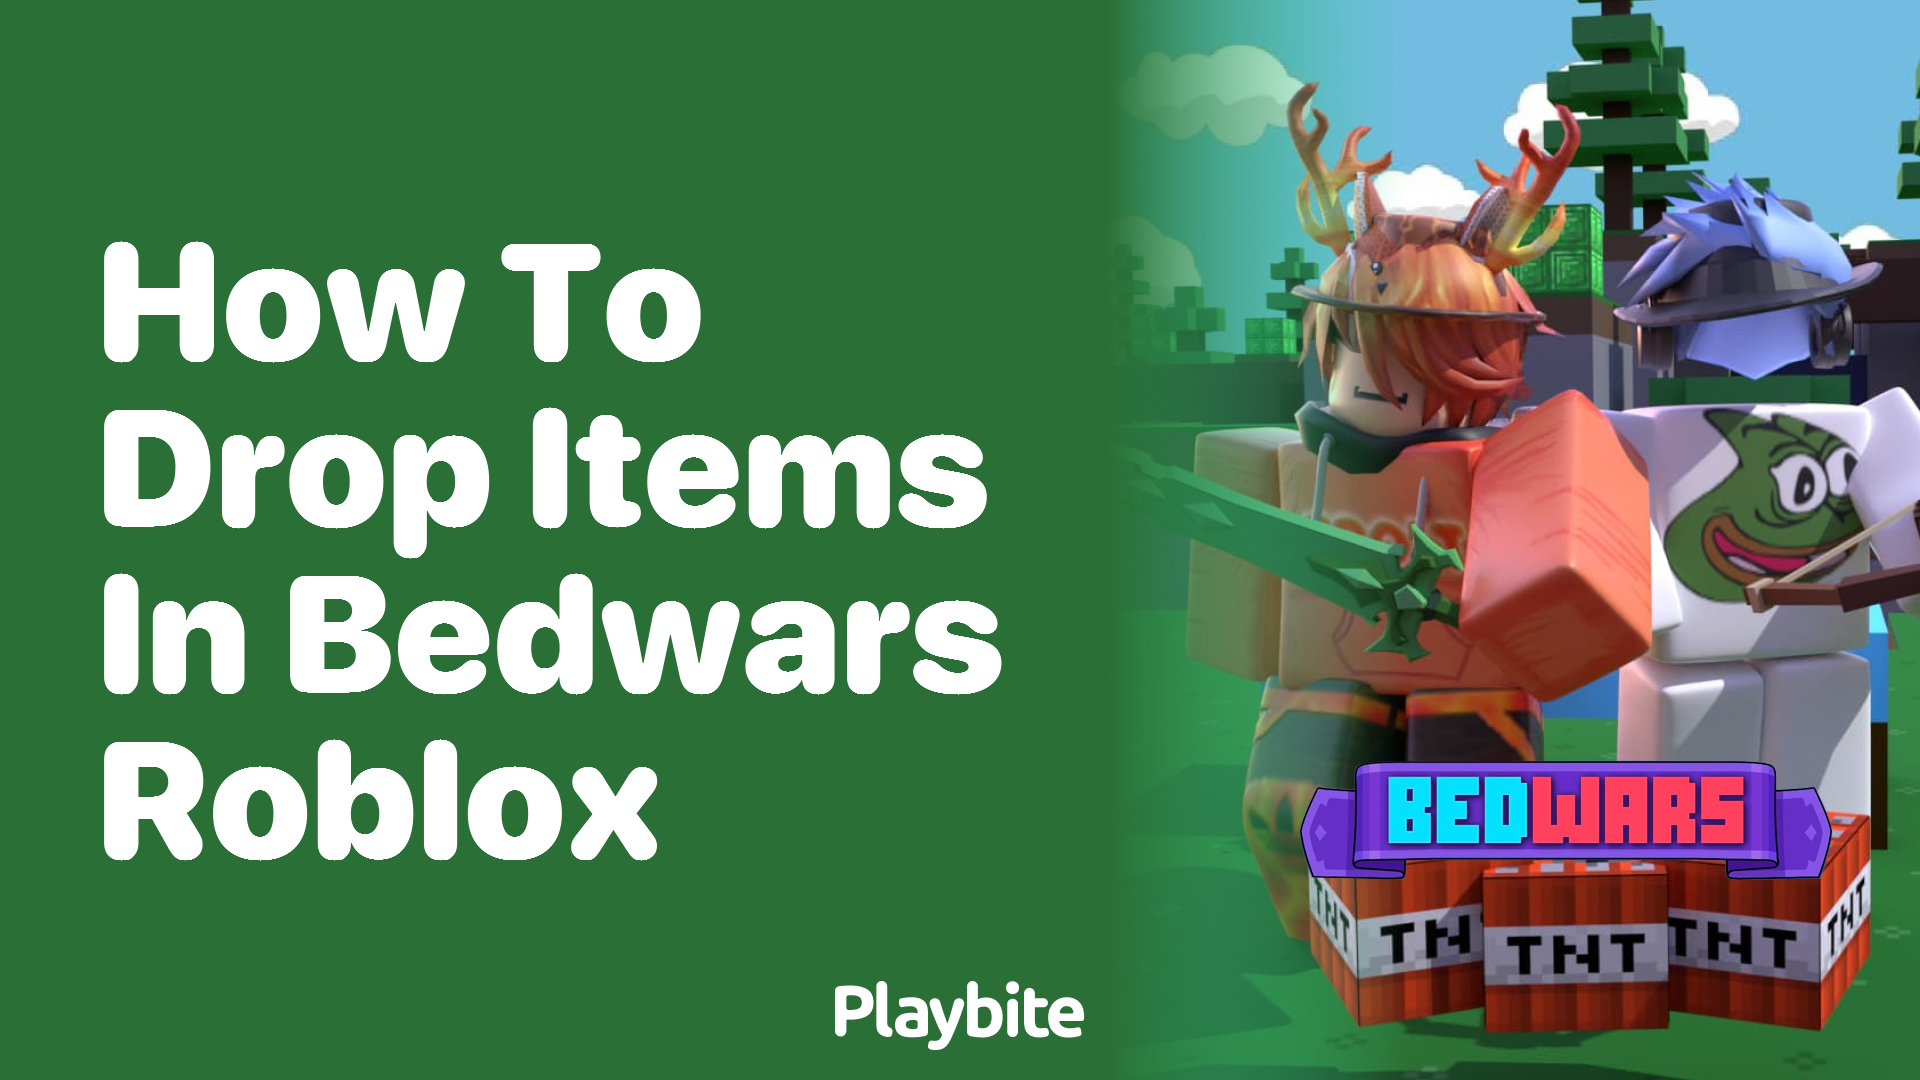 How to Drop Items in Bedwars Roblox: A Quick Guide